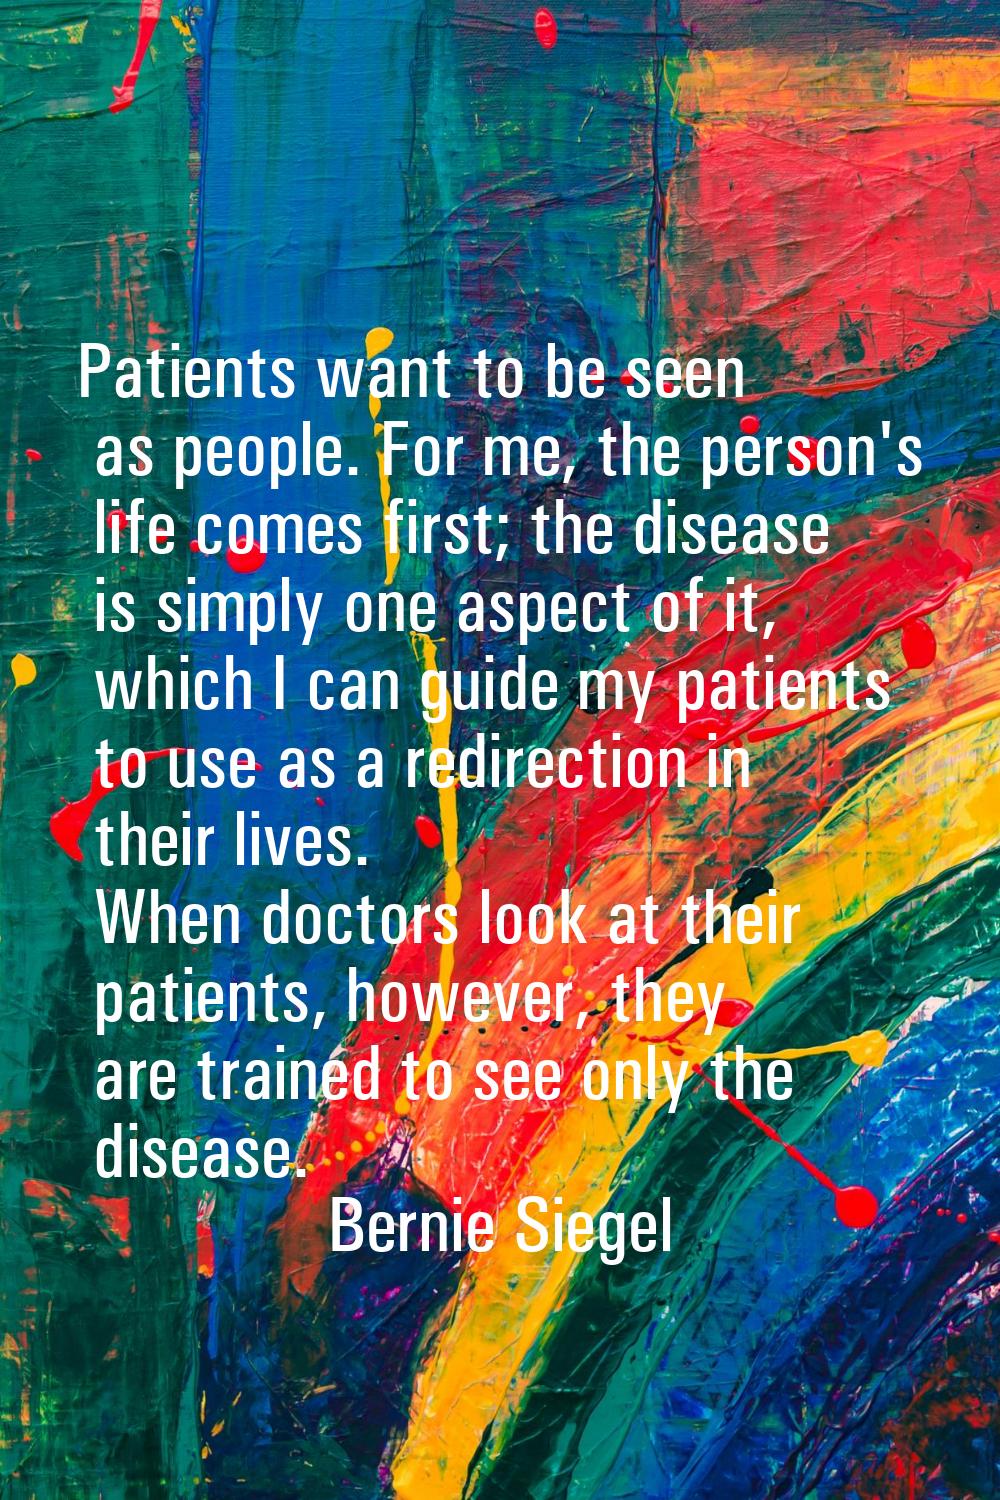 Patients want to be seen as people. For me, the person's life comes first; the disease is simply on